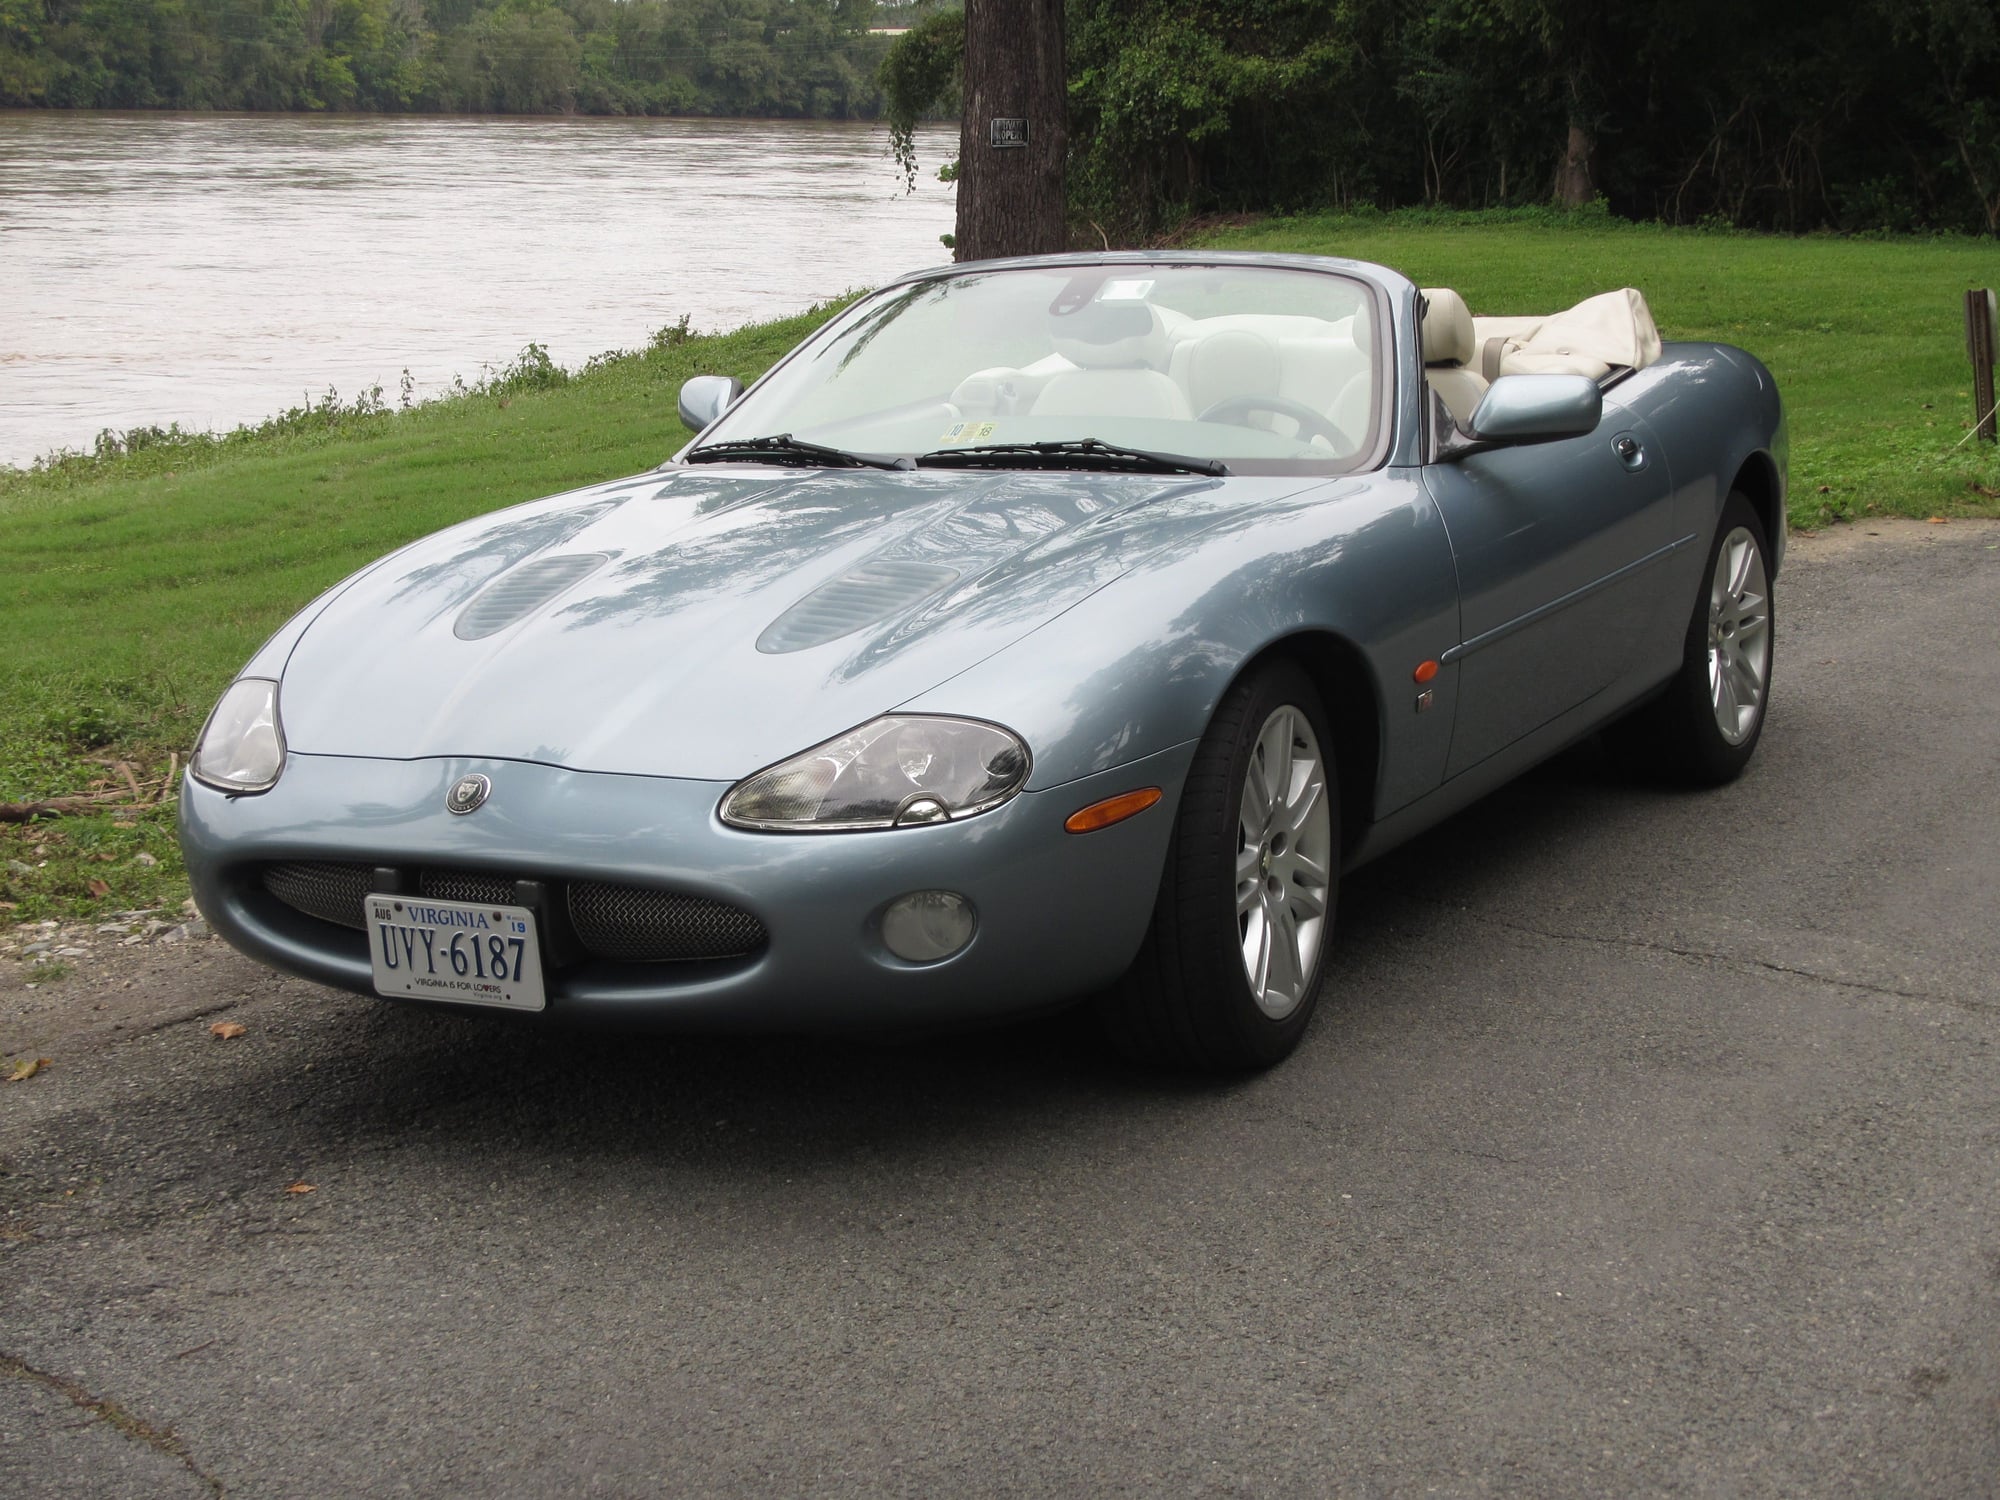 2003 Jaguar XKR - 2003 Jaguar XKR Convertible - Great Looking and Running Classic - Used - VIN SAJDA42B733A35999 - 100,750 Miles - 8 cyl - 2WD - Automatic - Convertible - Blue - Richmond, VA 23226, United States